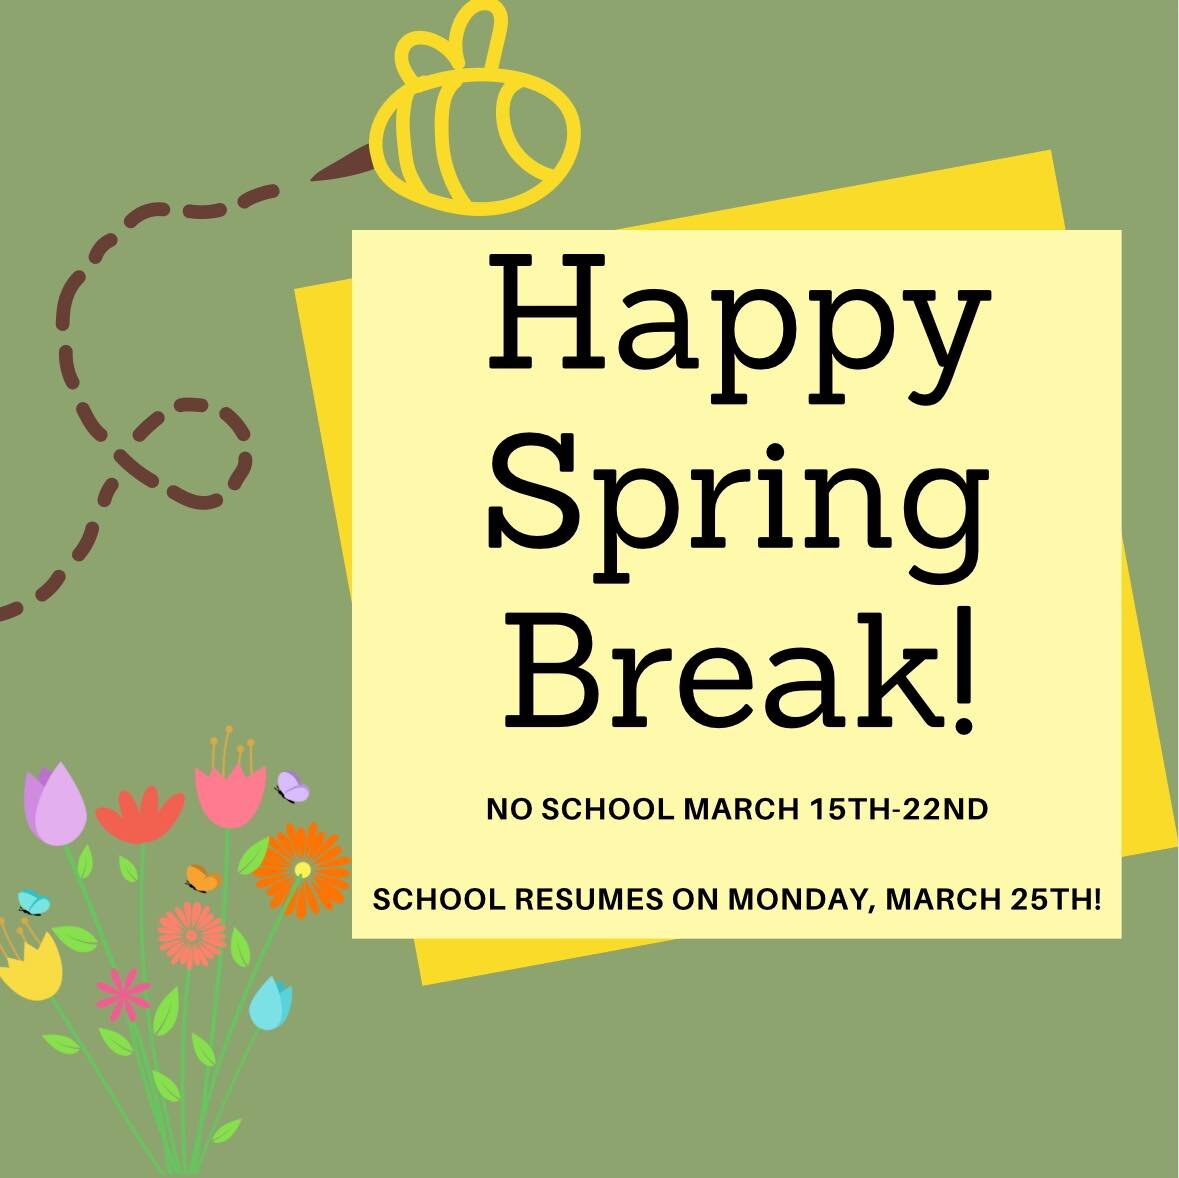 HAPPY FRIDAY AND HAPPY SPRING BREAK! 

Hope you all have an amazing time off from school ☀️ 
We will see you back in the classroom on Monday, 3/25.

#thatsPCS #premiercharterschool #springbreak